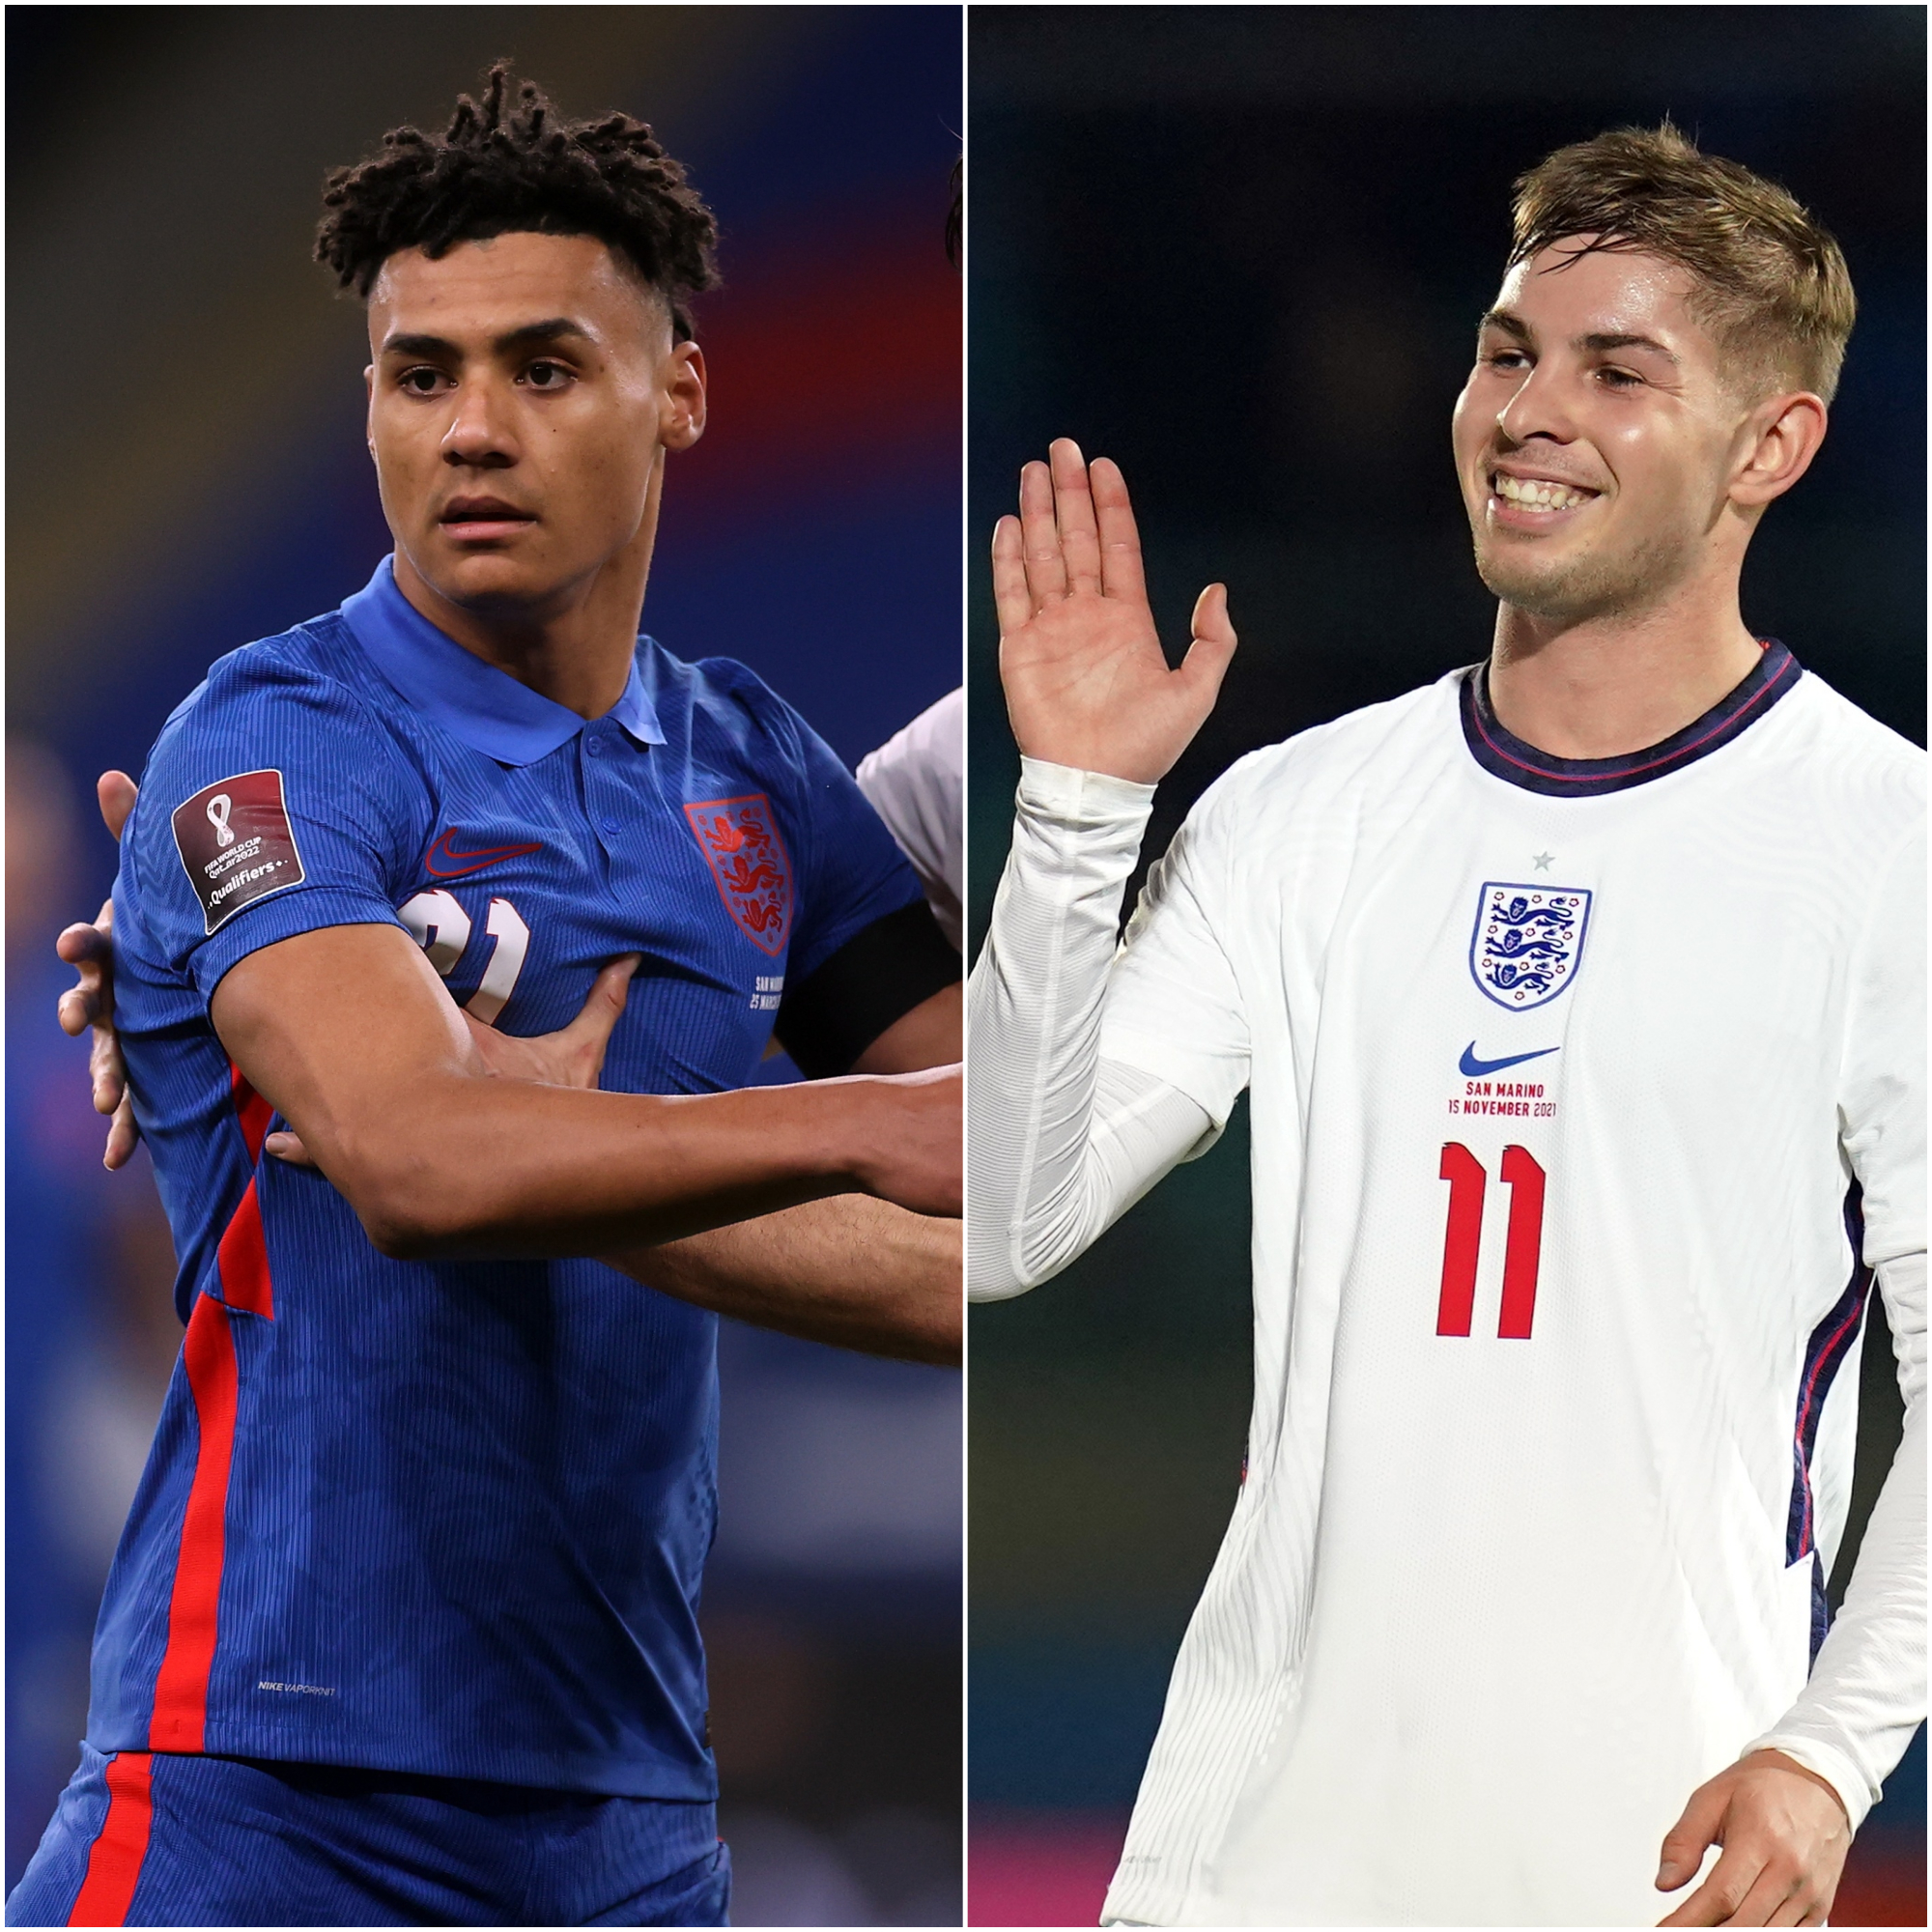 Ollie Watkins, left, and Emile Smith Rowe